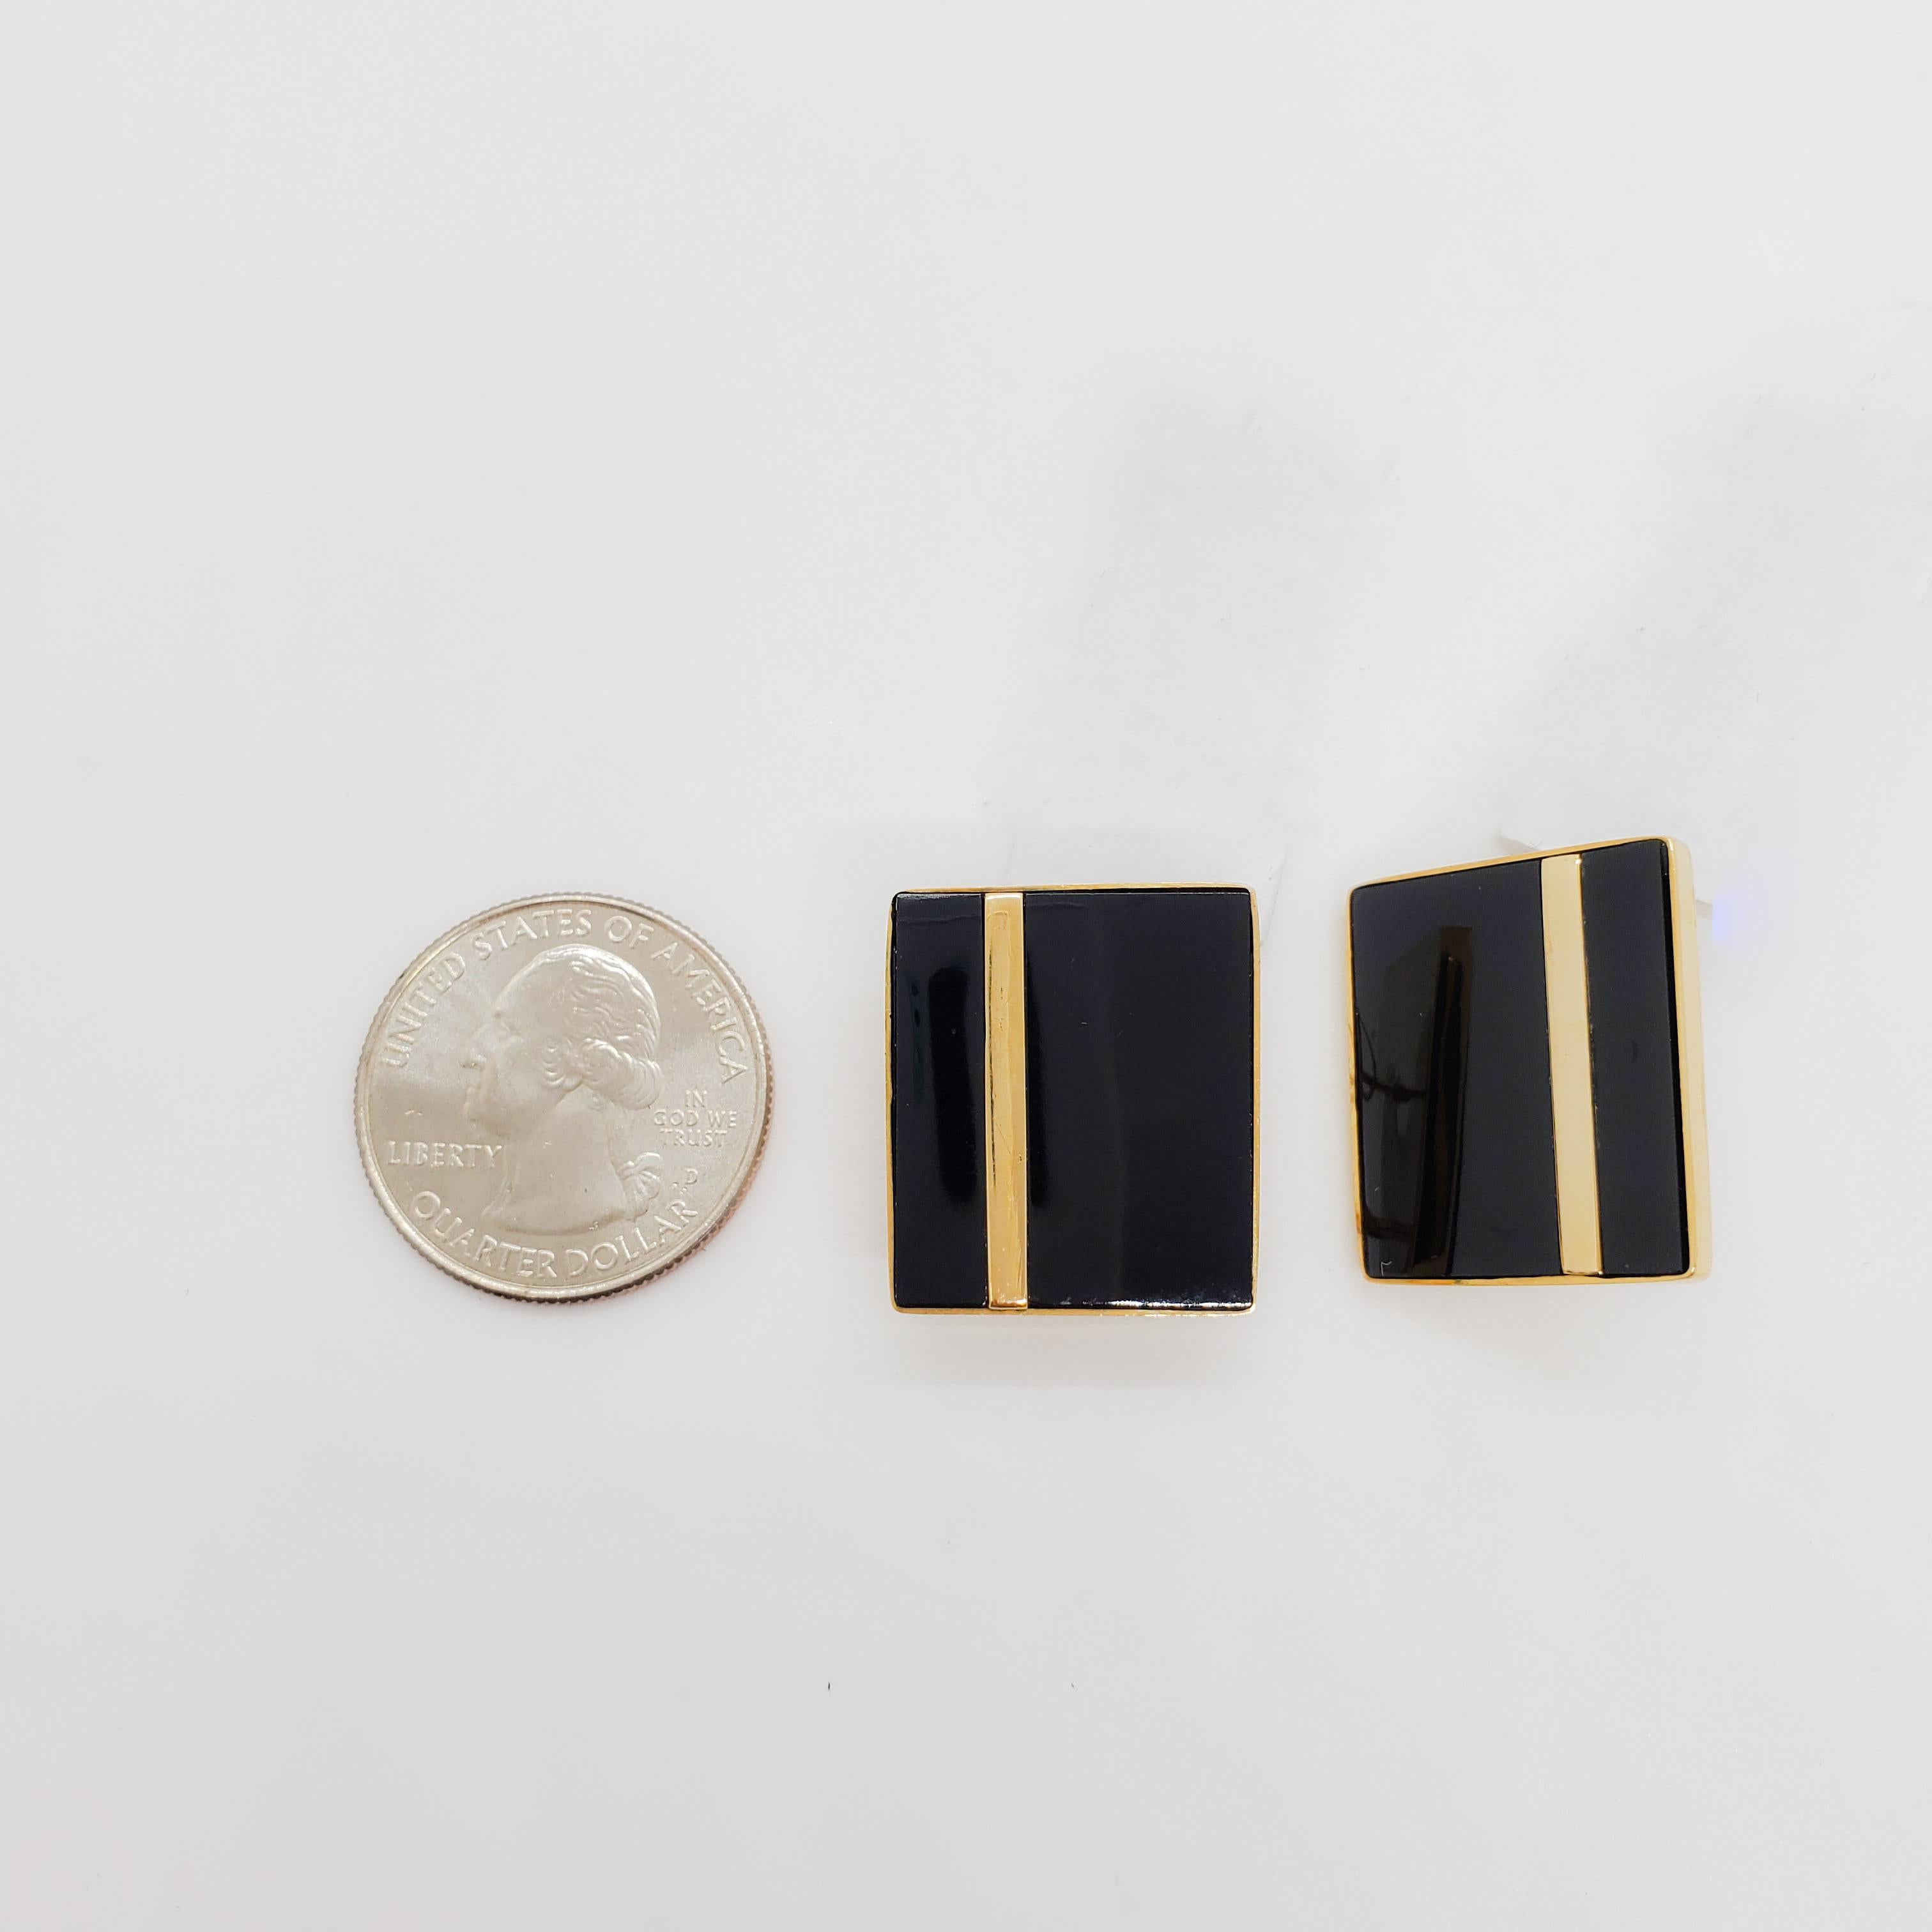 Uncut Estate Onyx and 14k Yellow Gold Earrings